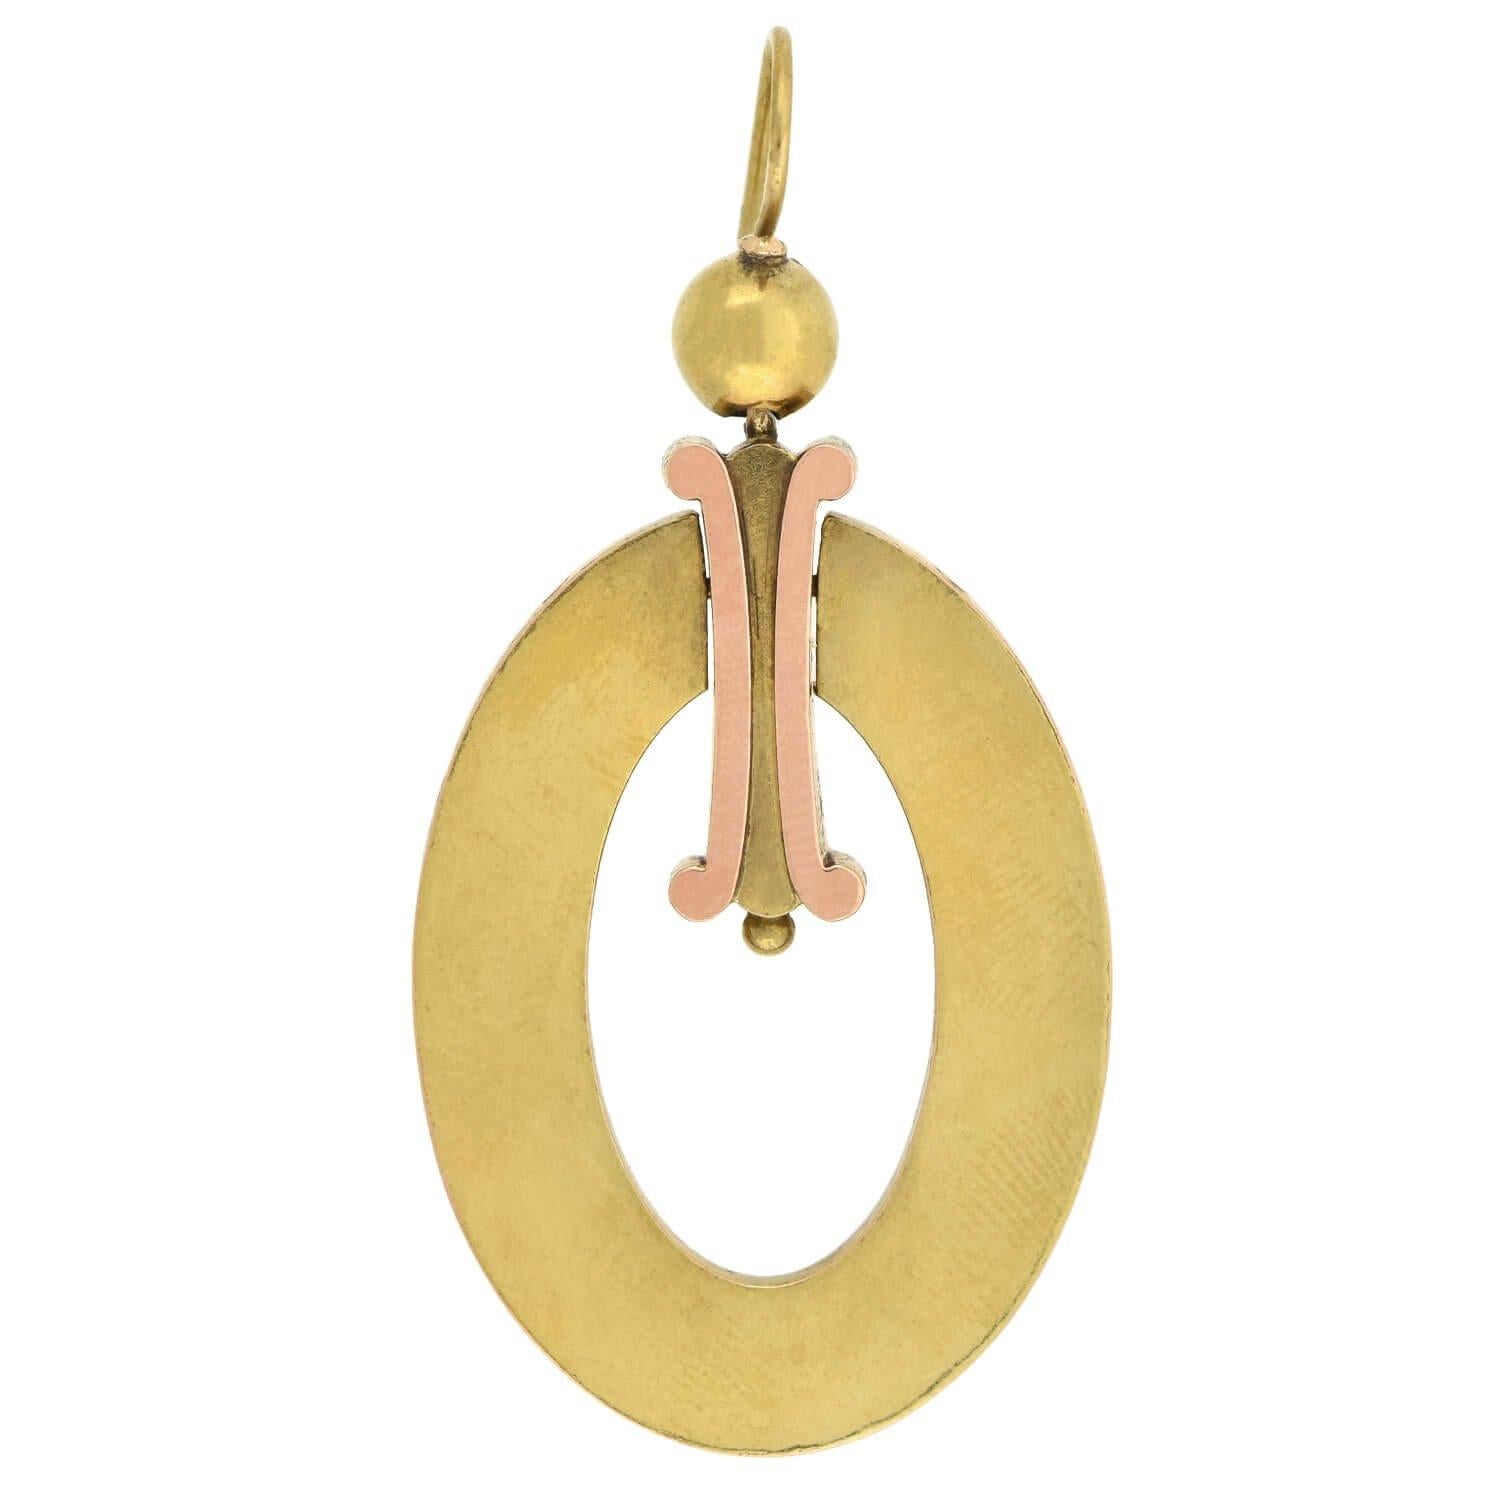 A very striking pair of two-tone gold earrings from the Victorian (ca1880s) era! These dramatic earrings are crafted in 15kt yellow and rose gold and are quite substantial in size. A large oval-shaped open hoop hangs in the center, attached to a